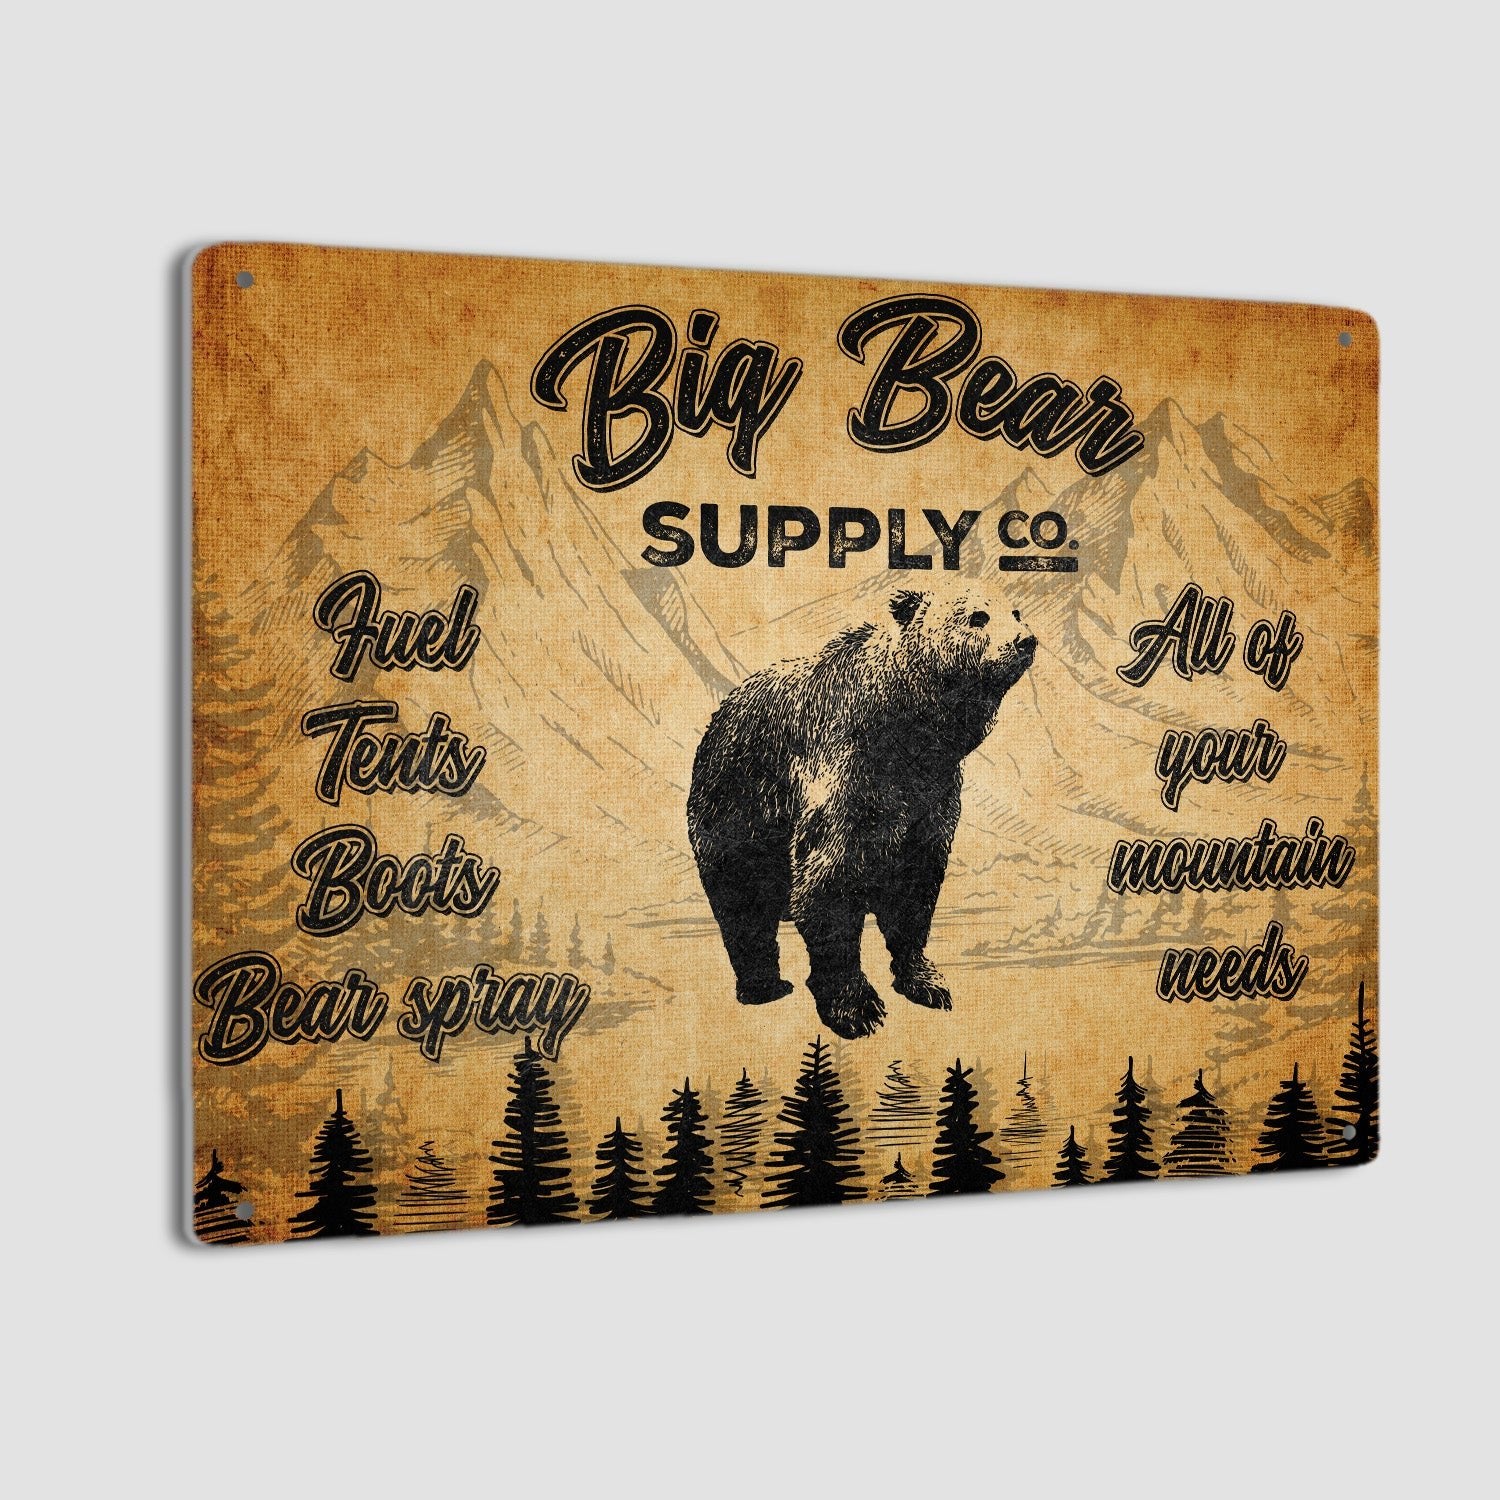 Big Bear Fuel Tents Boots Bear Spray, All Of Your Mountain Needs